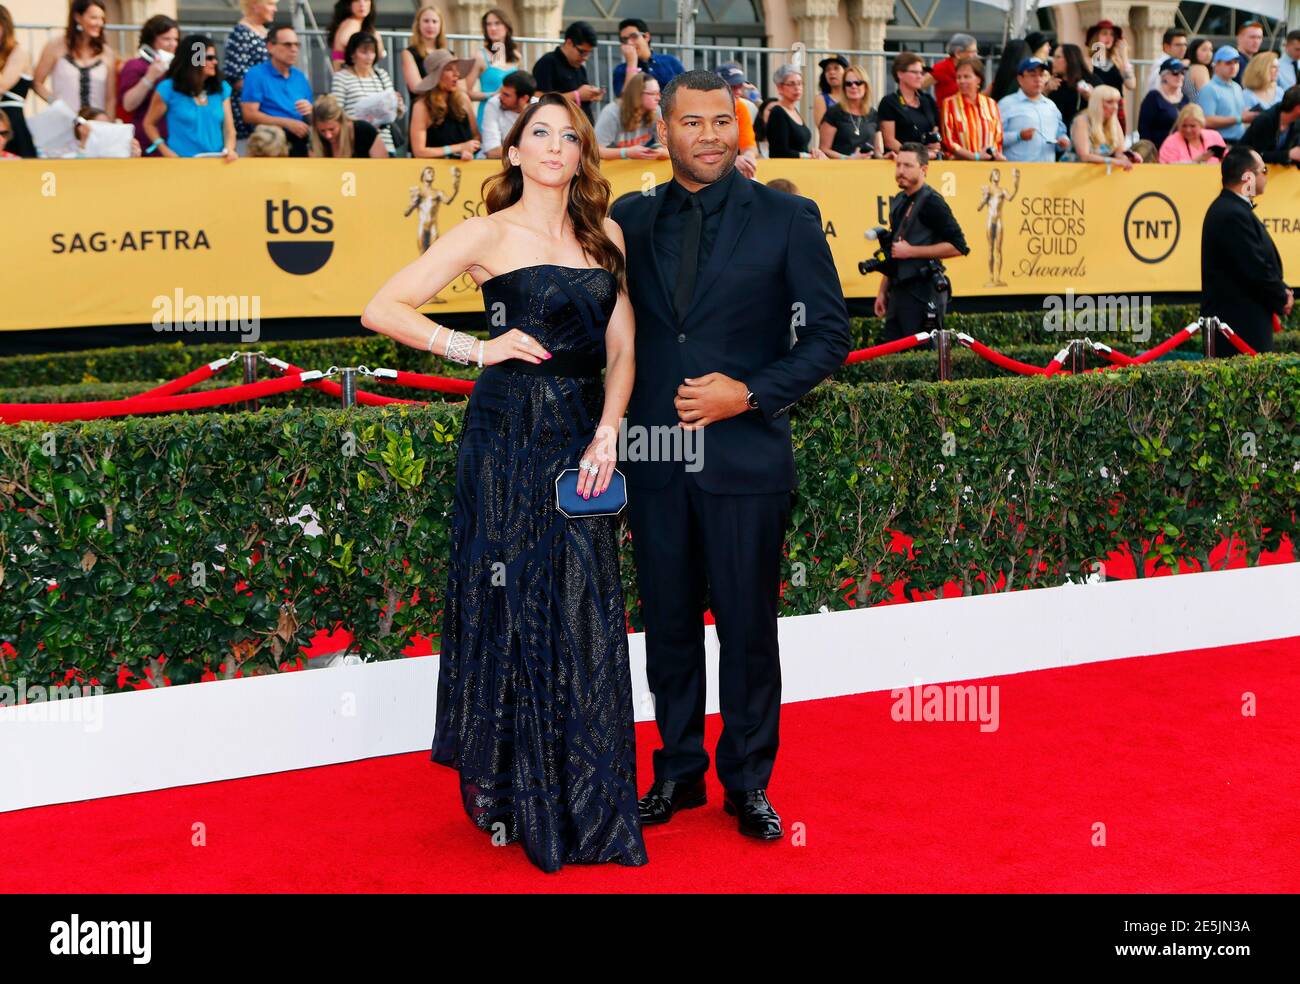 Actress Chelsea Peretti from the FOX series "Brooklyn Nine-Nine" and Jordan  Peele from the Comedy Central series "Key and Peele" arrive at the 21st  annual Screen Actors Guild Awards in Los Angeles,